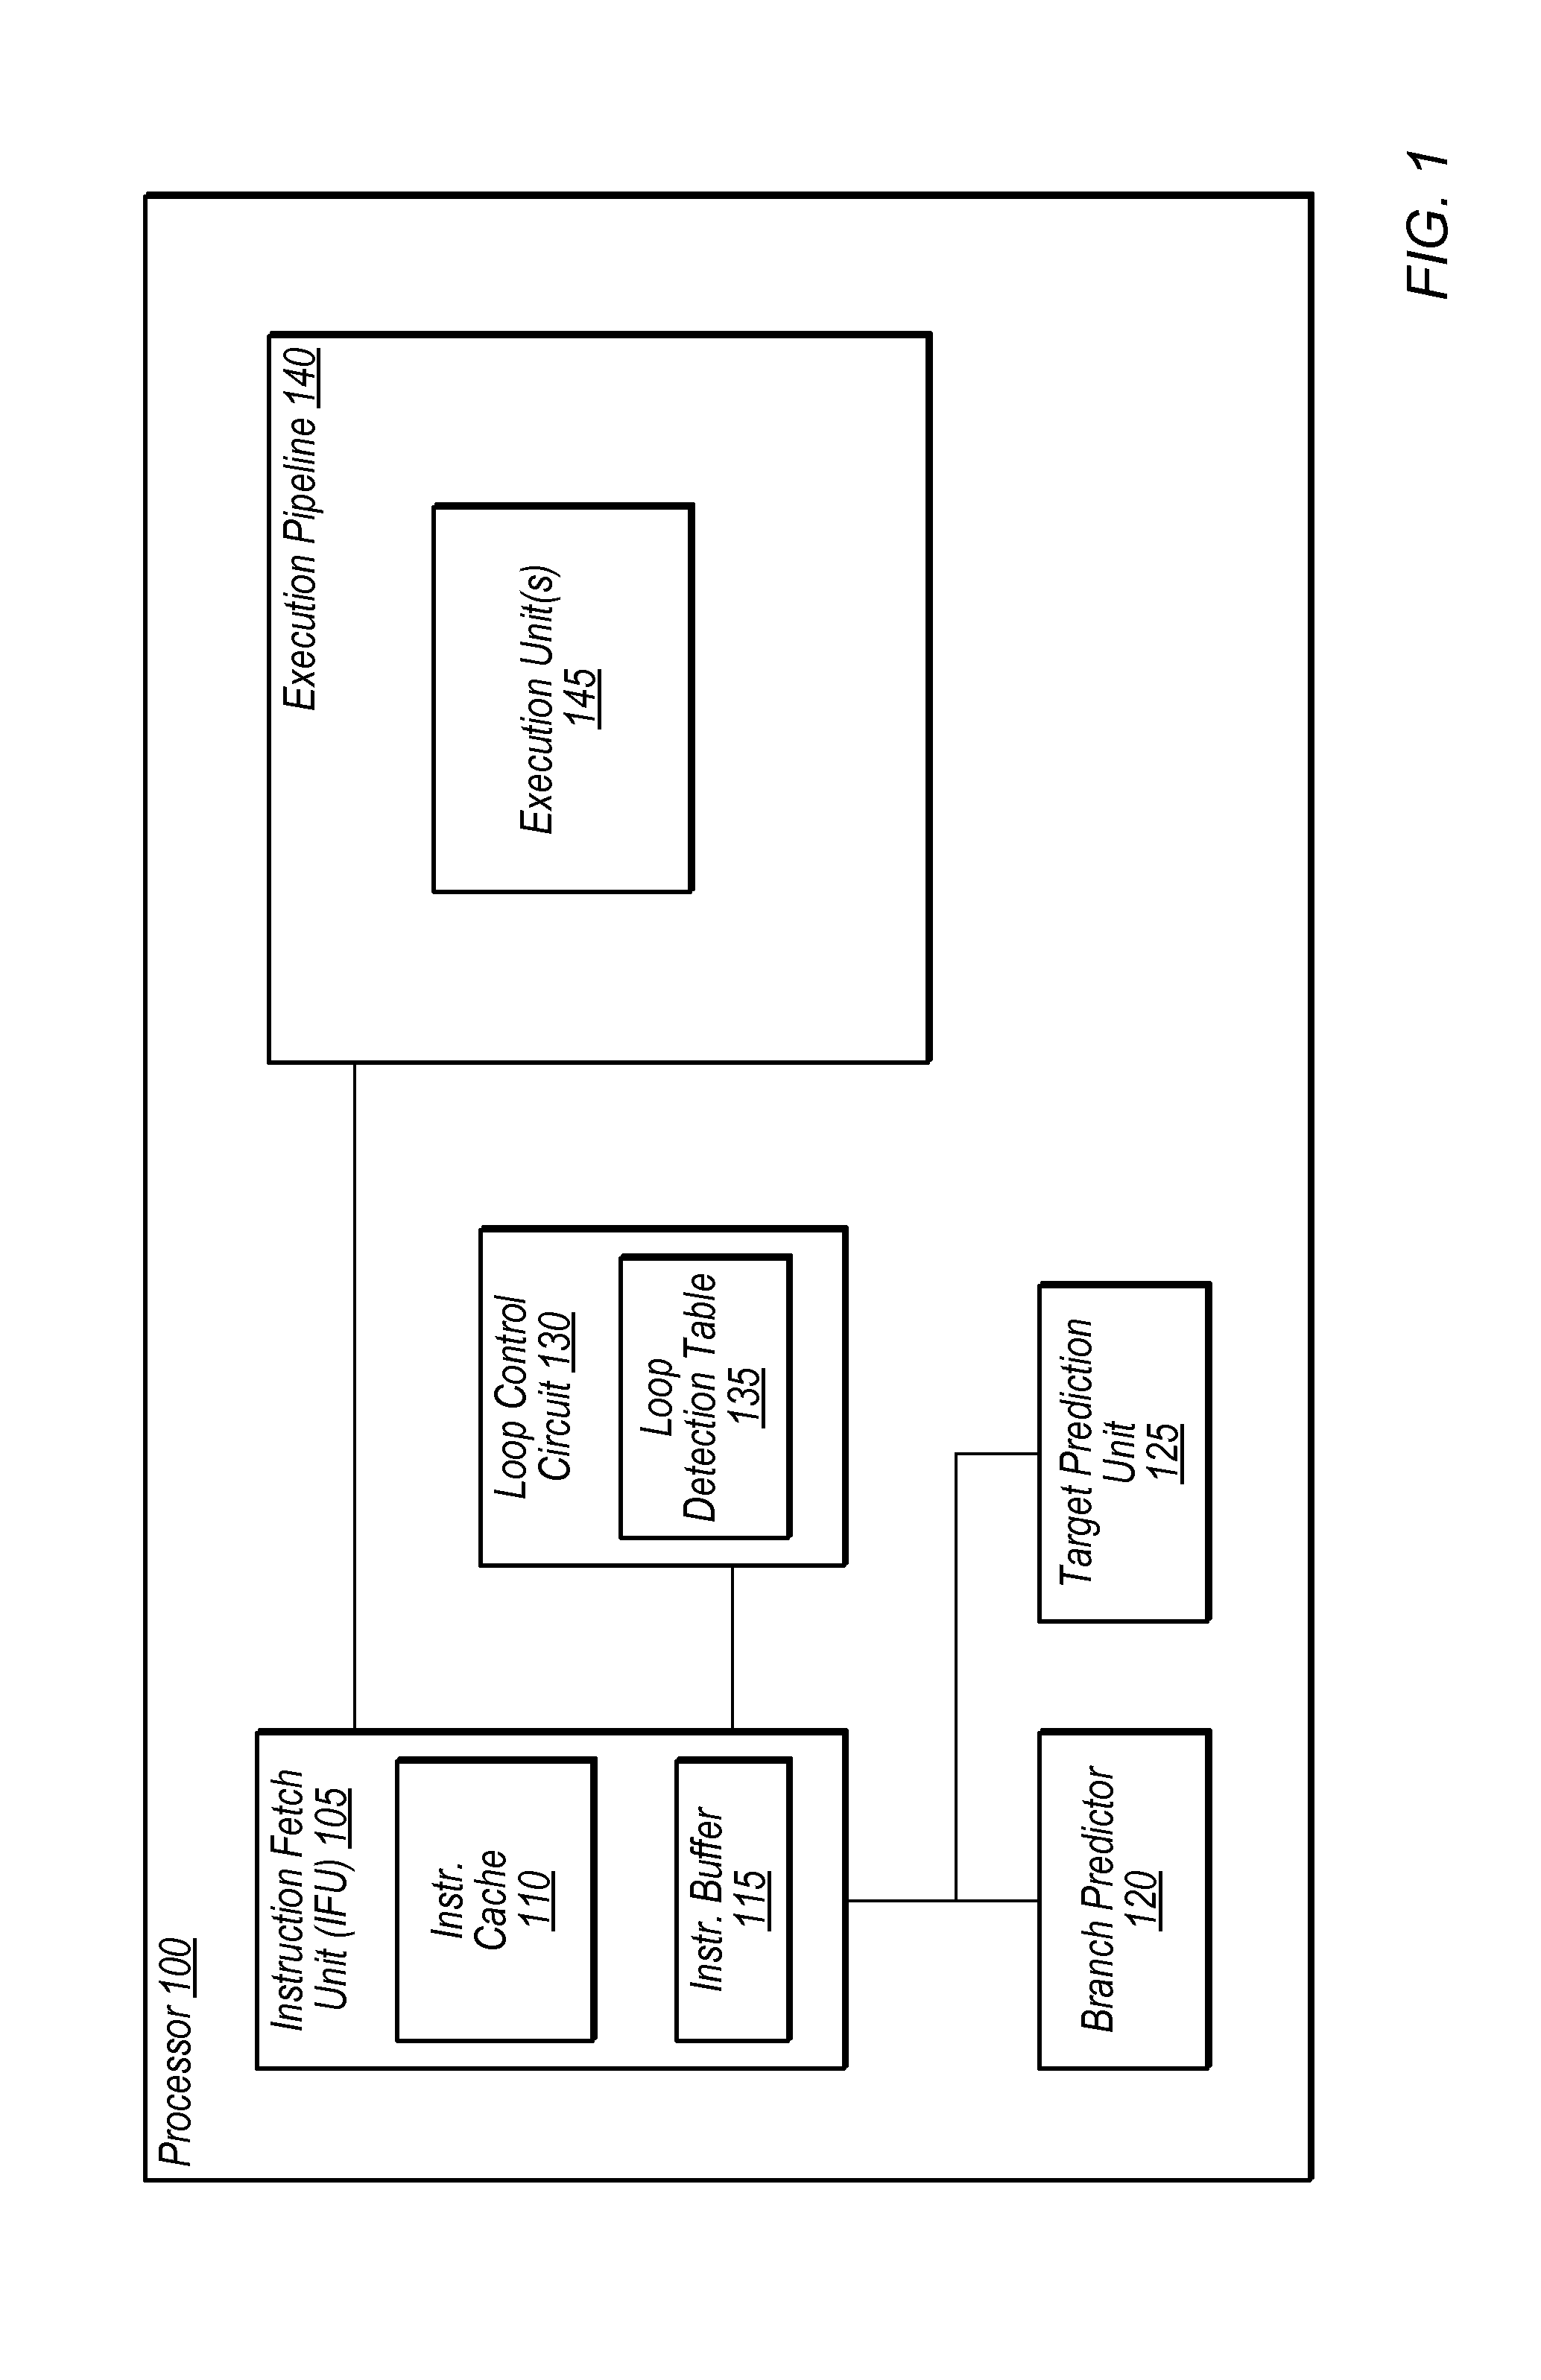 Instruction loop buffer with tiered power savings